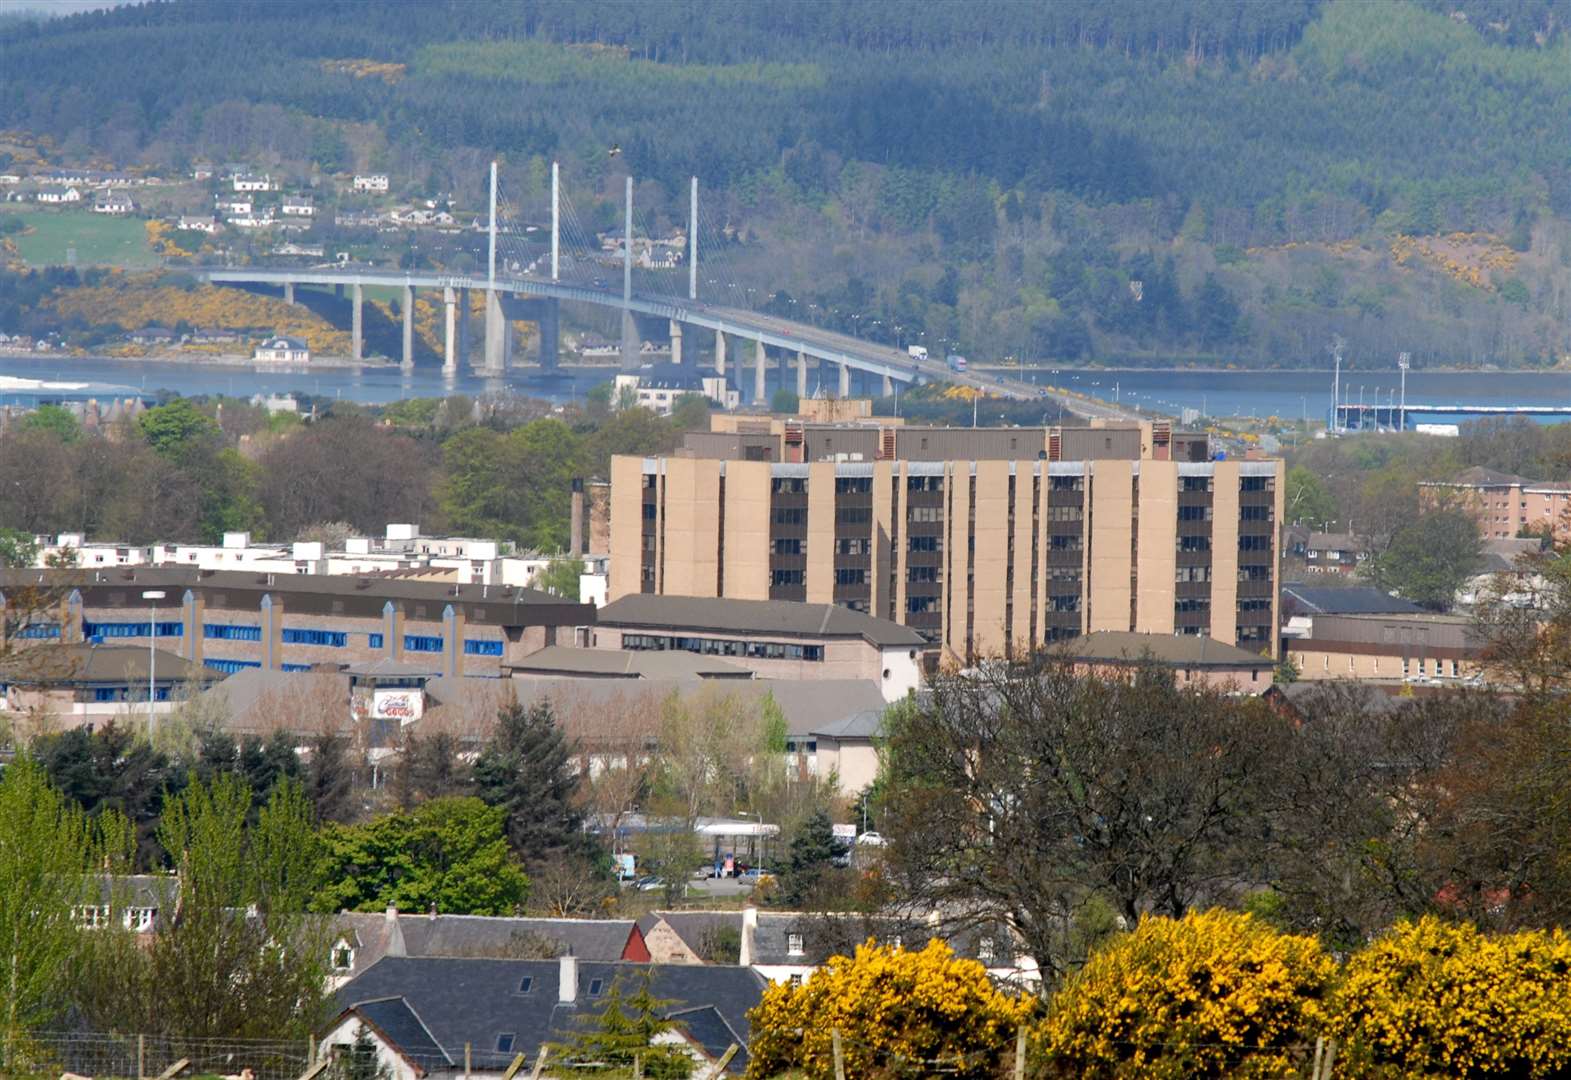 Looking towards Raigmore Hospital in Inverness.